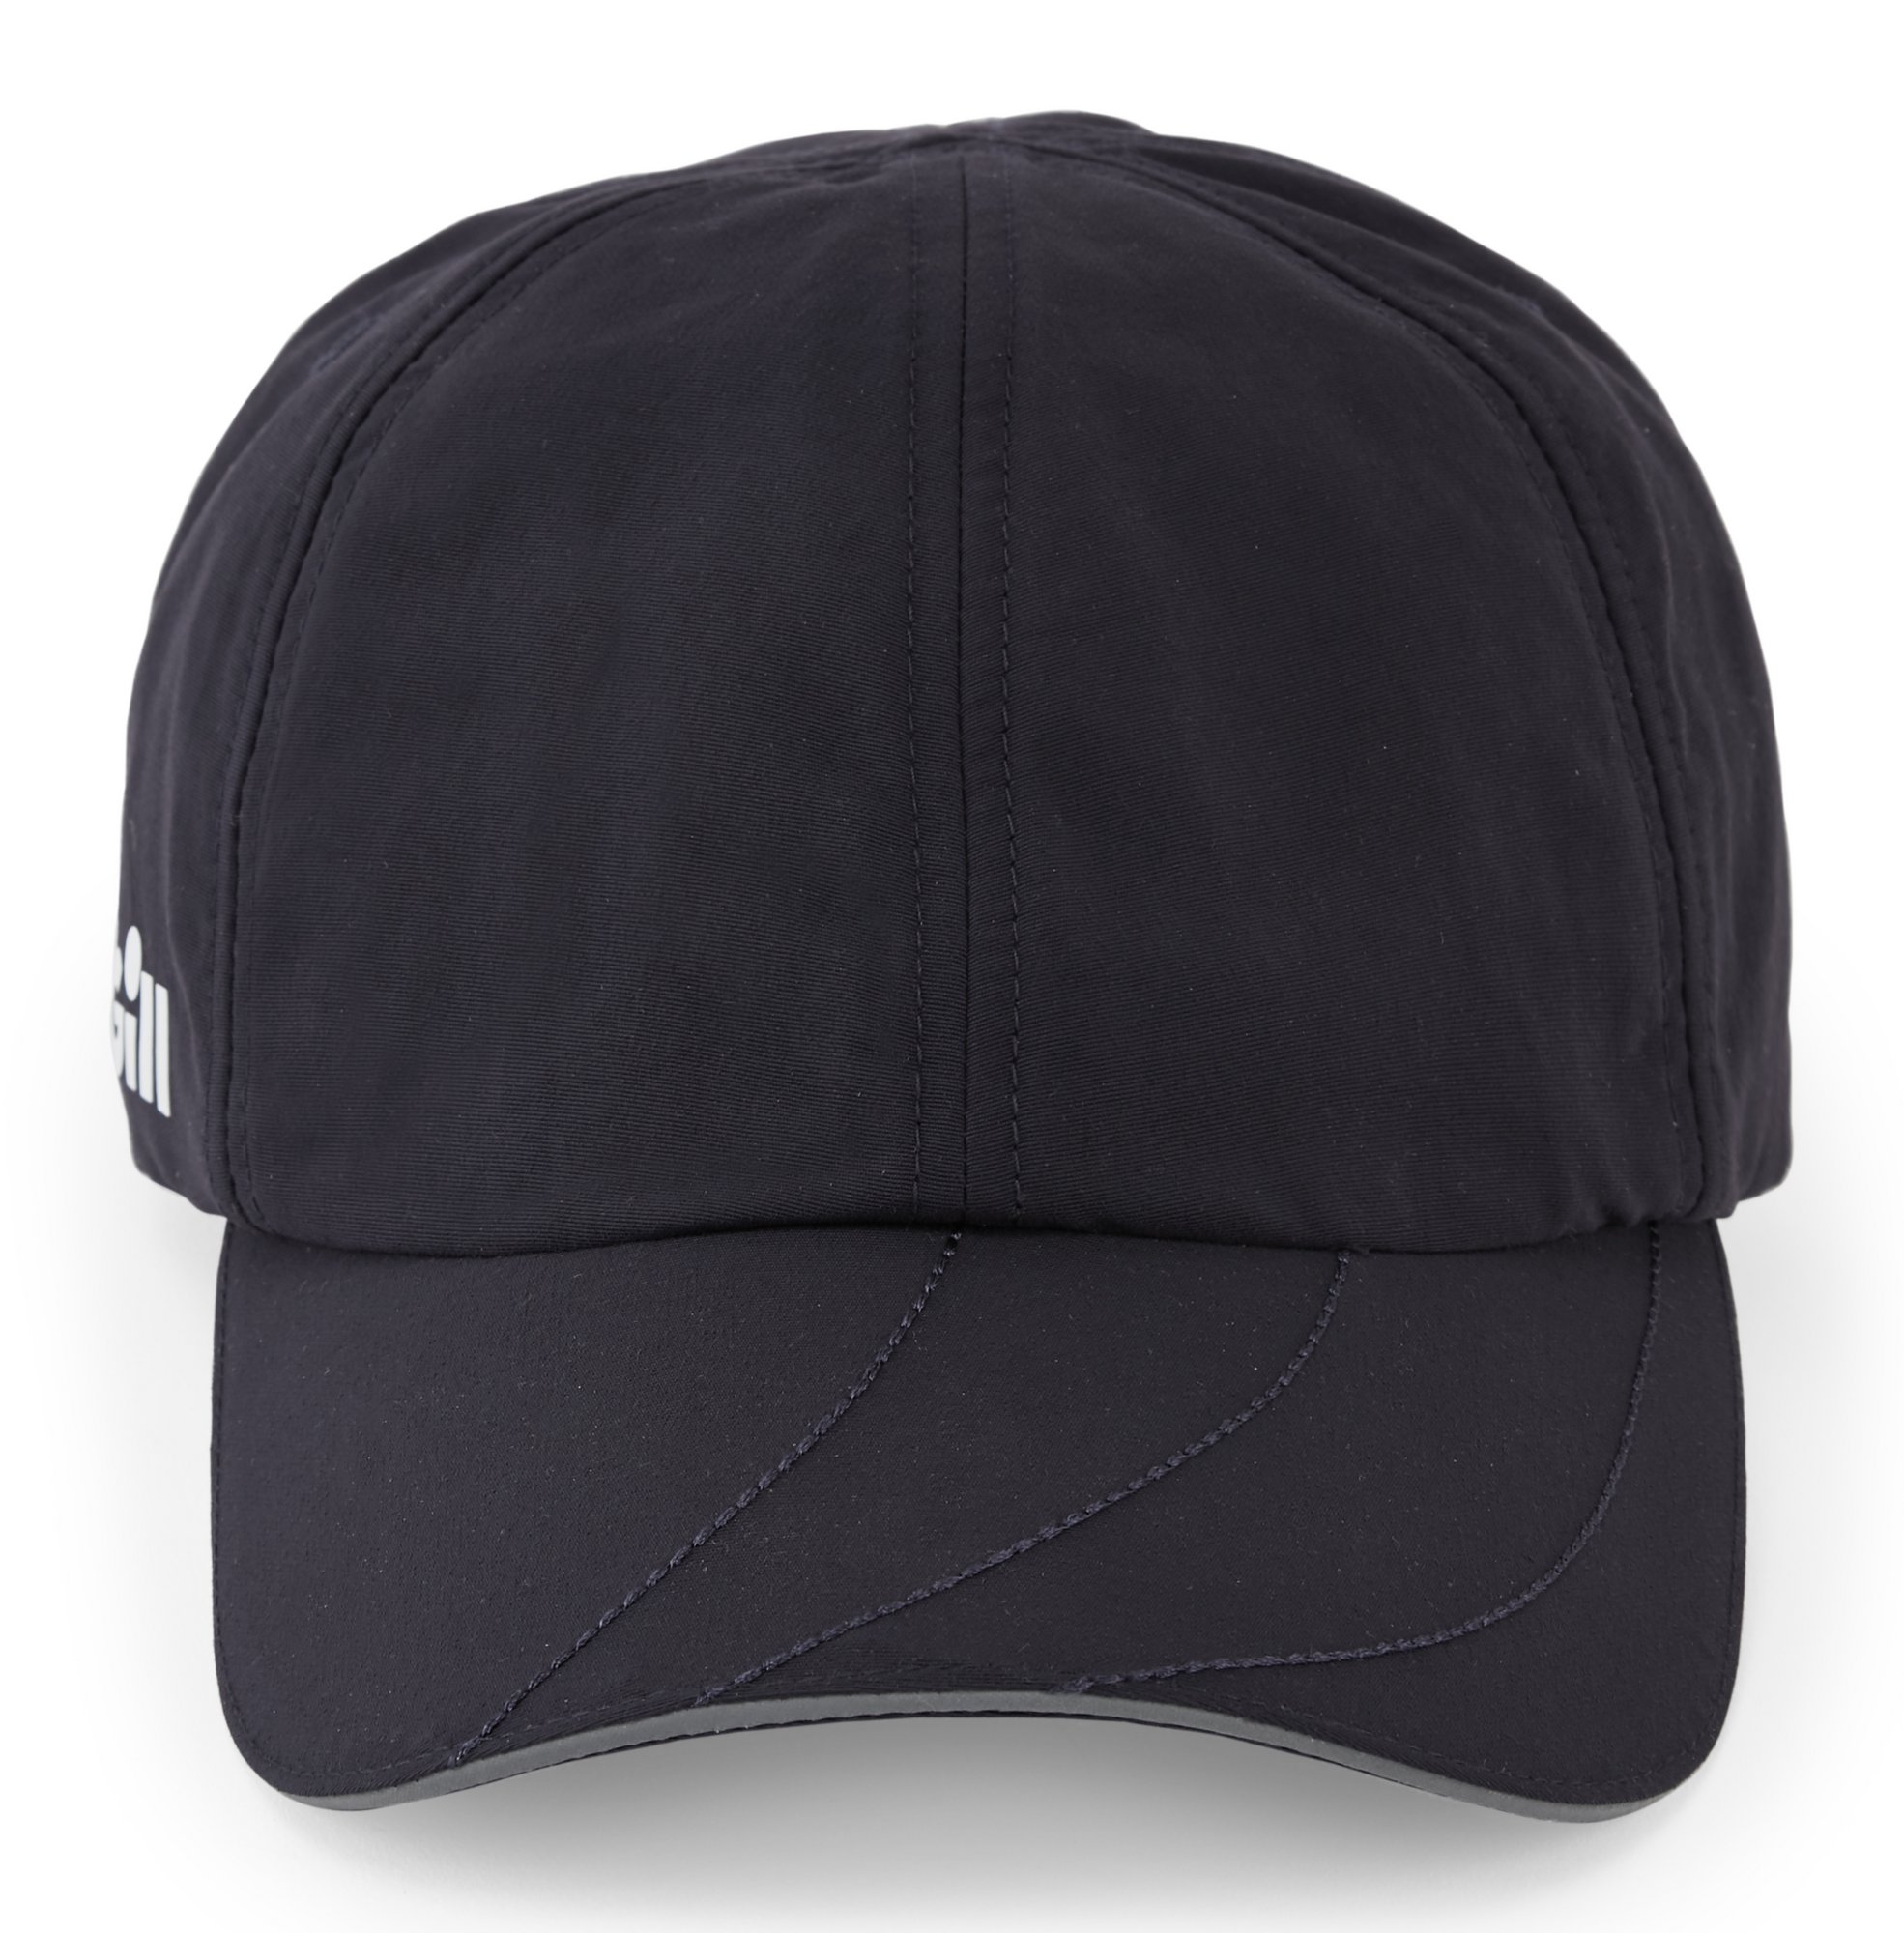 Cap-Ban-Nu™ Cotton Knit Hat Size Reducer & Sweat Liner – Mill Valley Hat Box